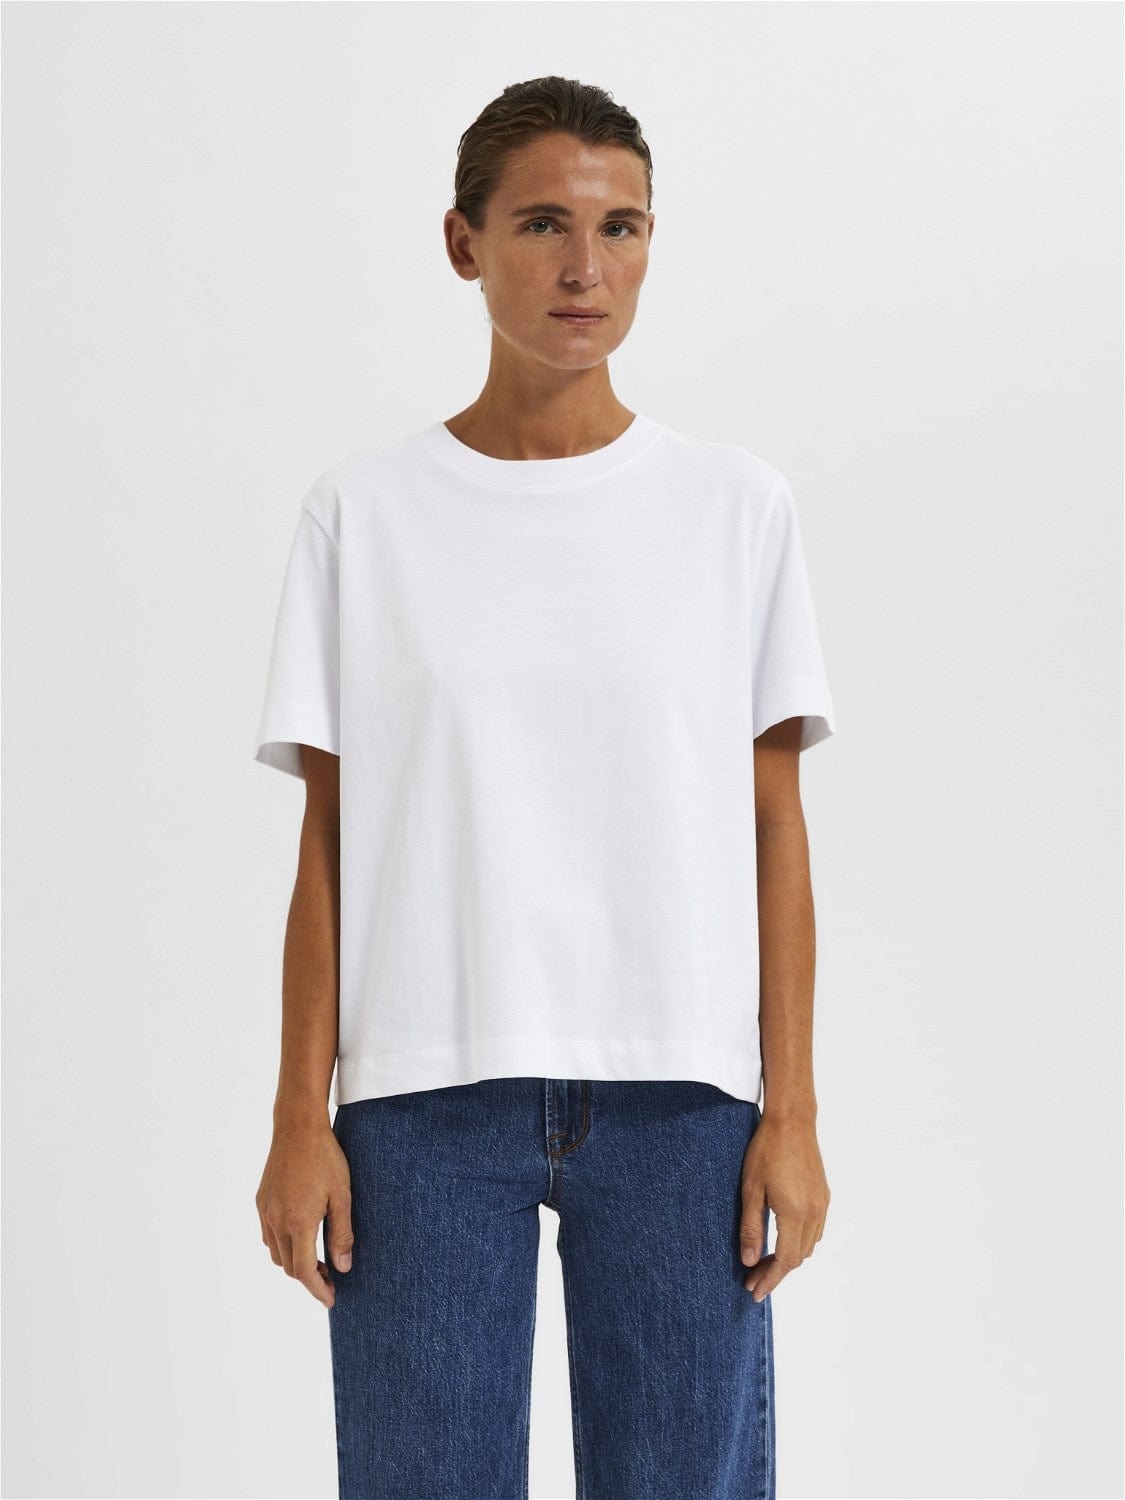 Selected Femme t-shirts & toppe Hvid boxy sort tshirt- Selected Femme Essential